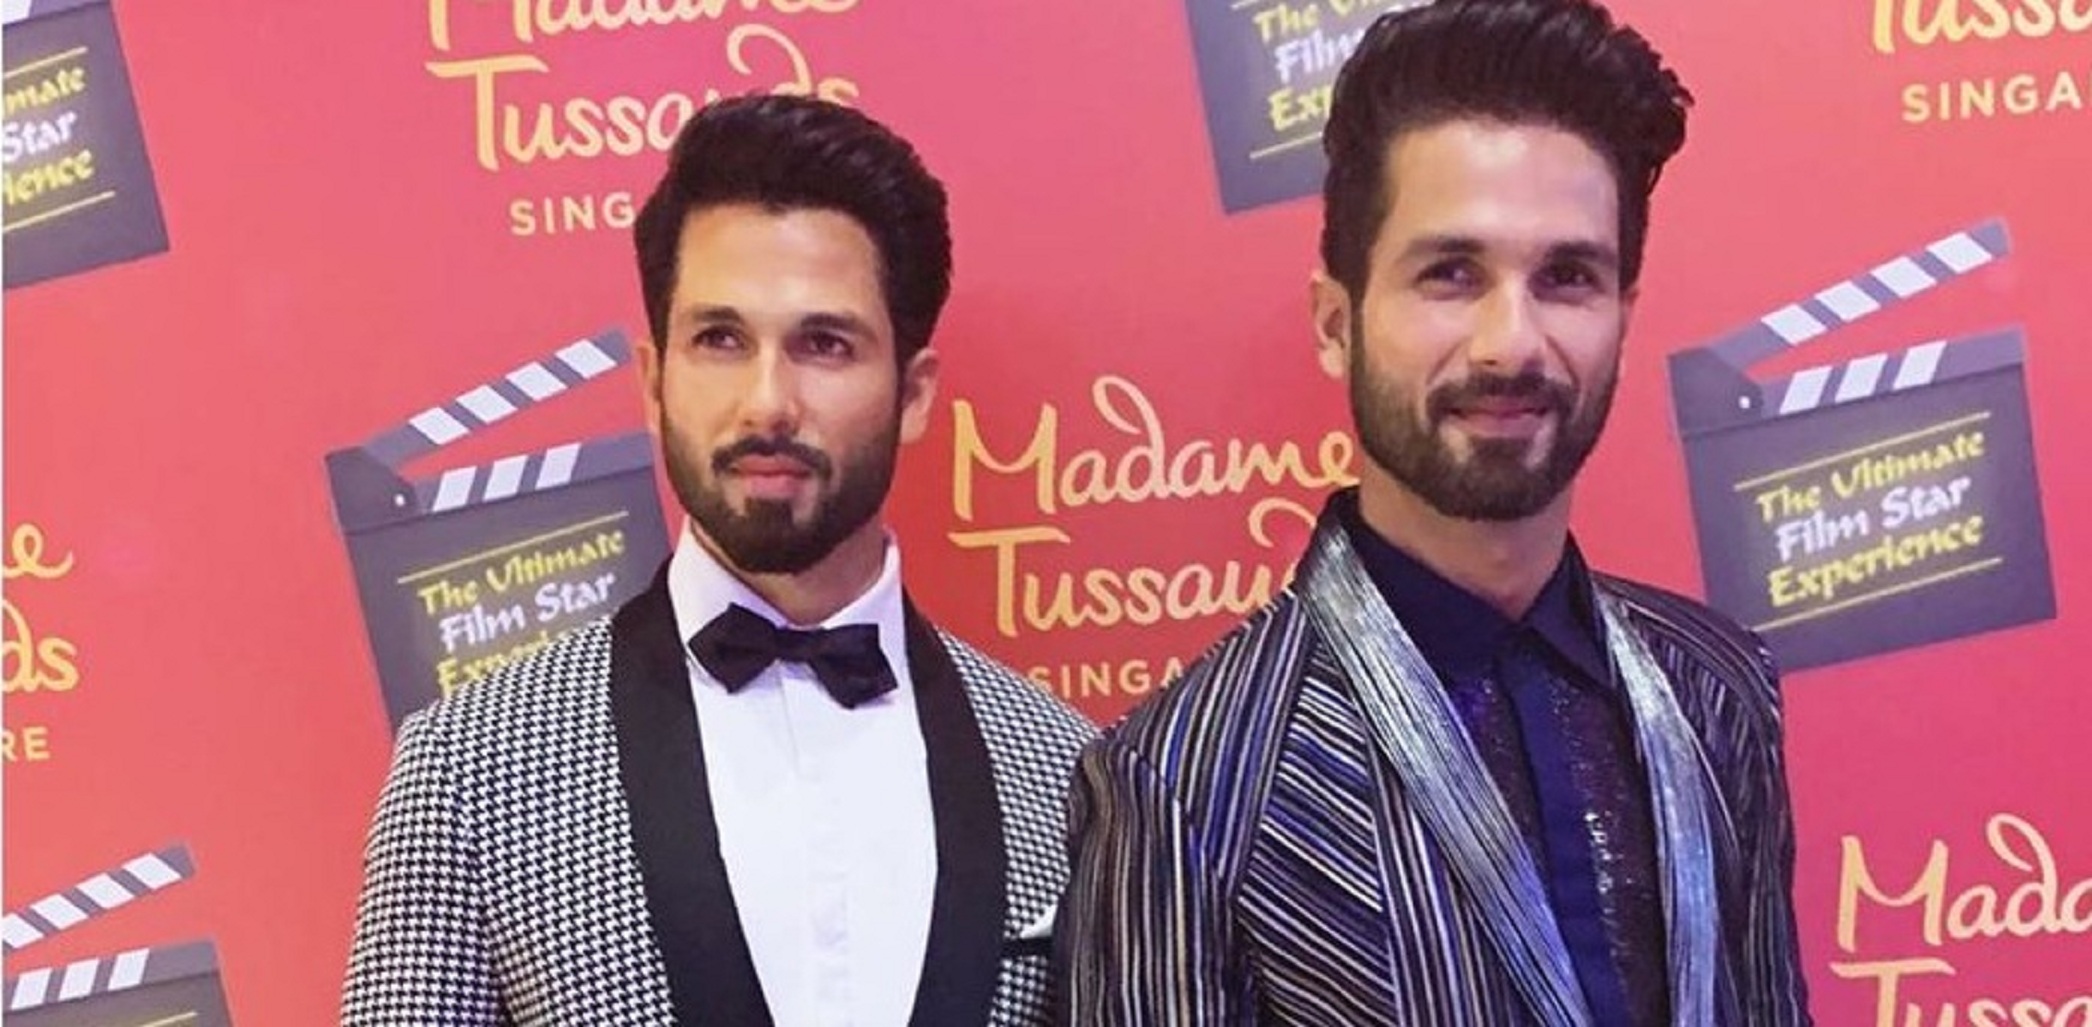 Madame Tussauds Unveils Wax Figure Of Shahid Kapoor And Its A Ditto Copy Of Him!